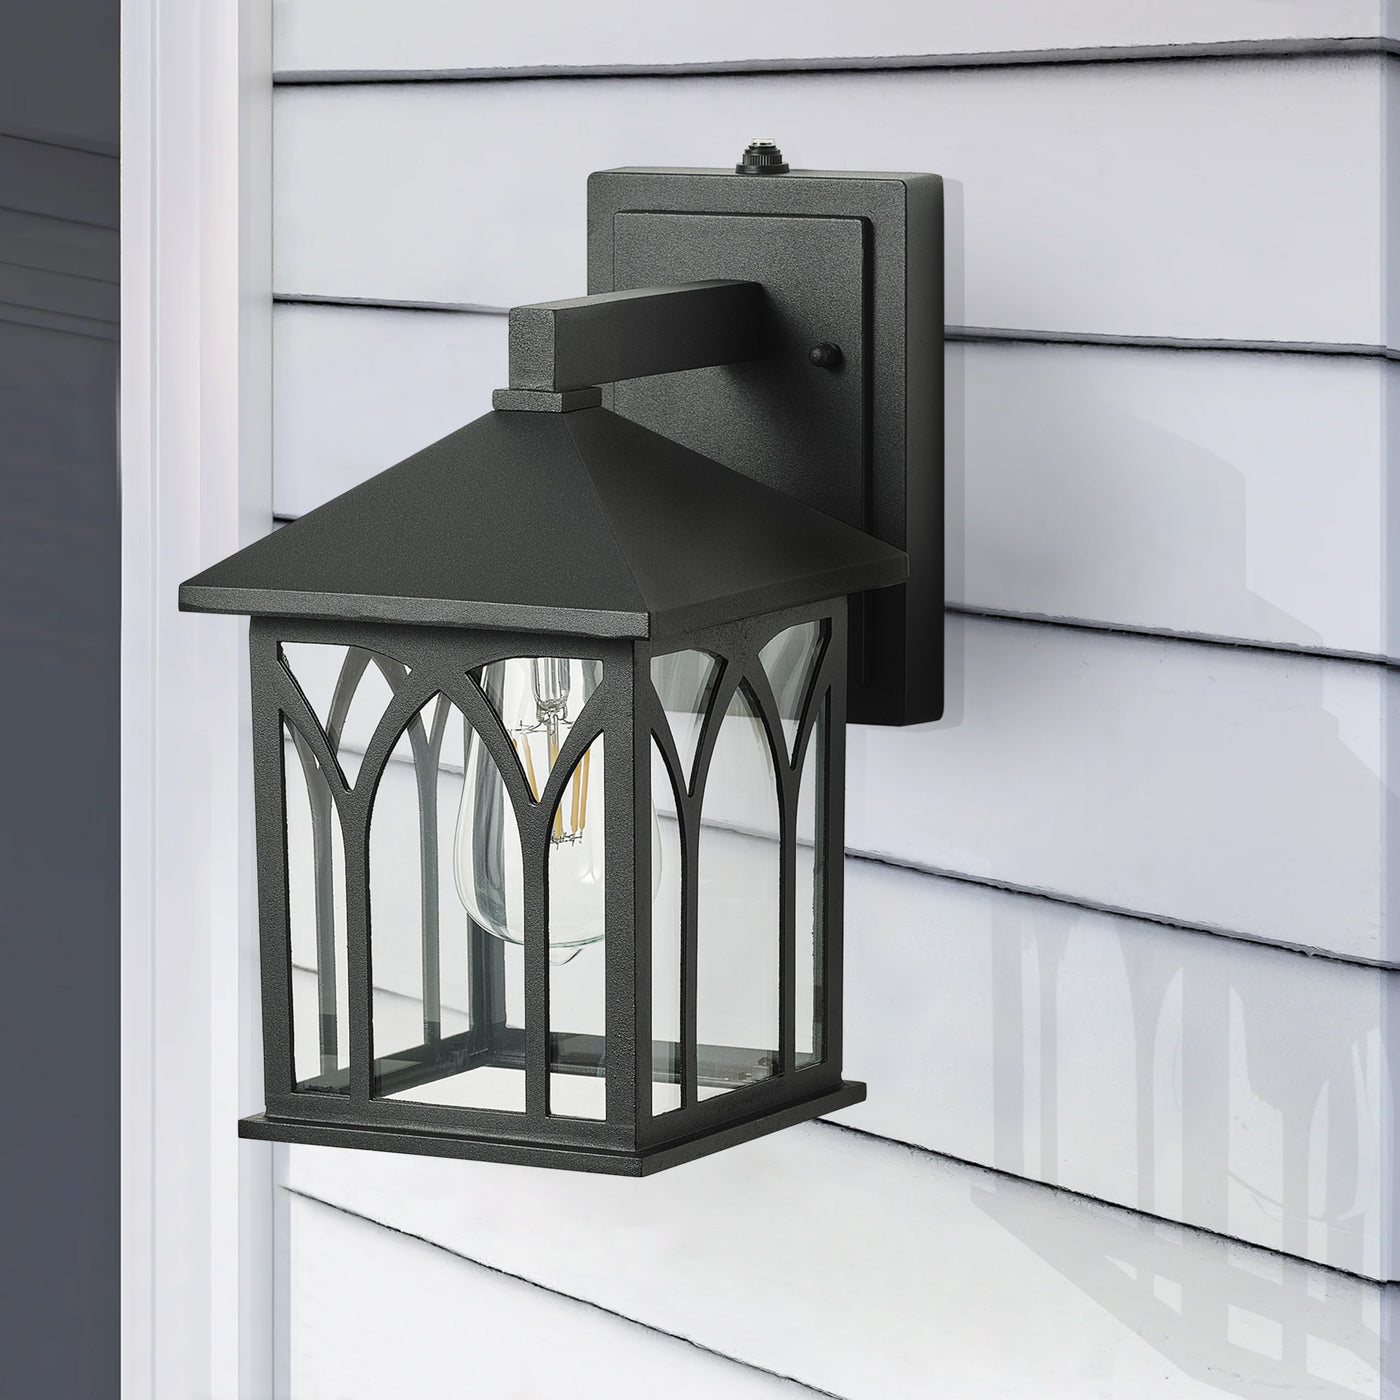 1-Light Square Metal Design Outdoor Wall Sconces